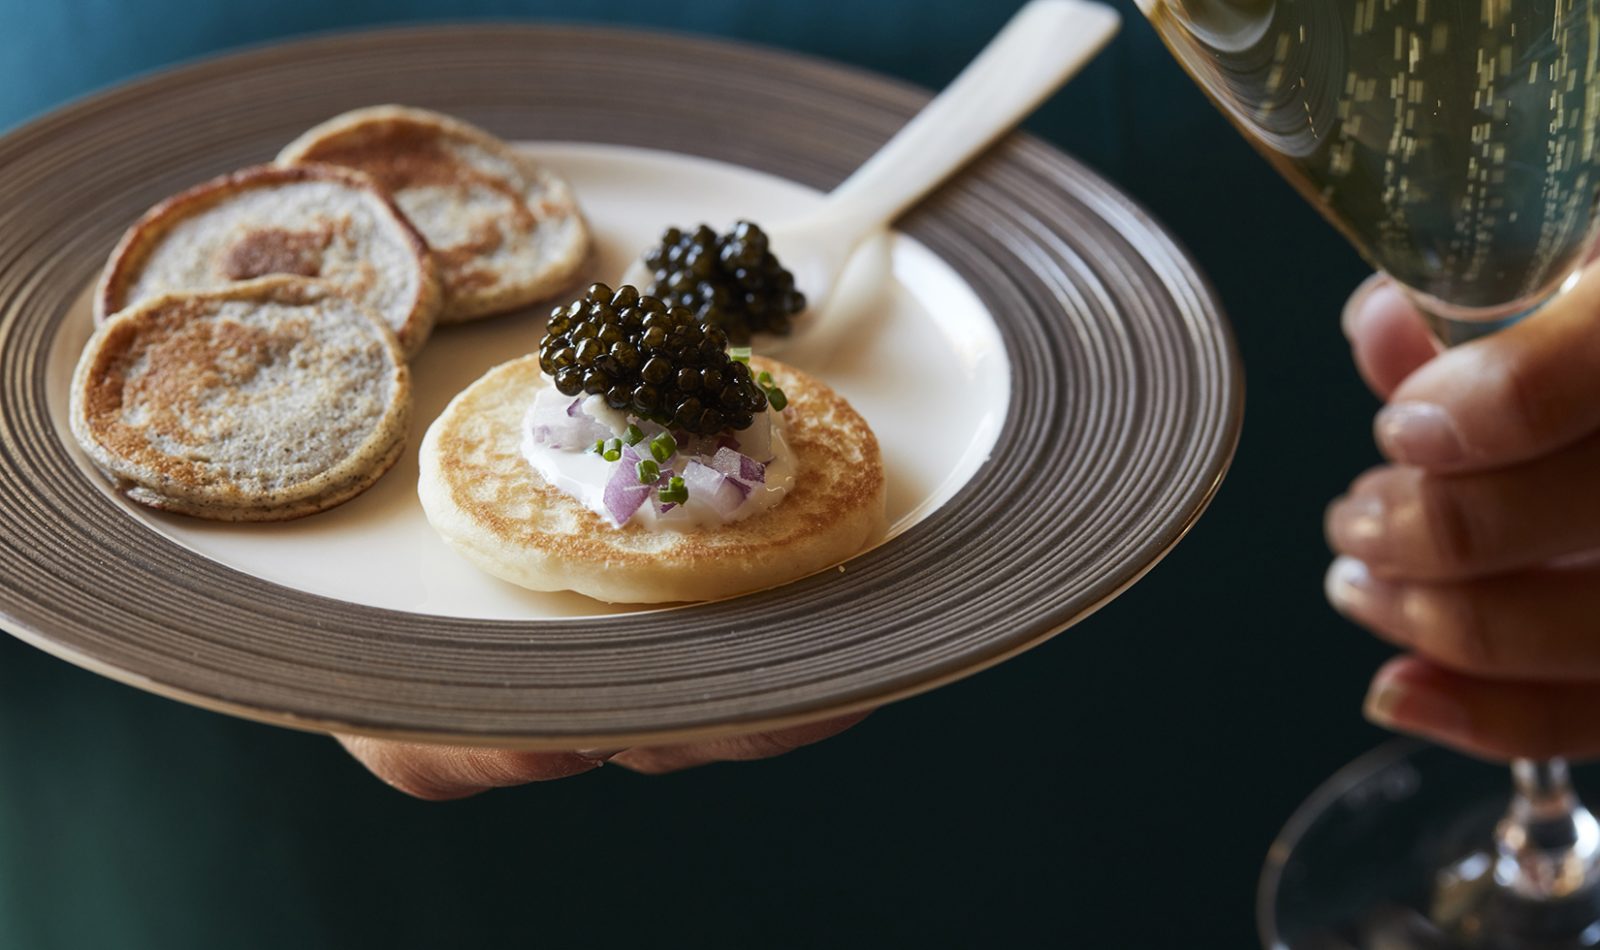 Jordan Winery Buckwheat Blinis with Chef's reserve Caviar and Champagne